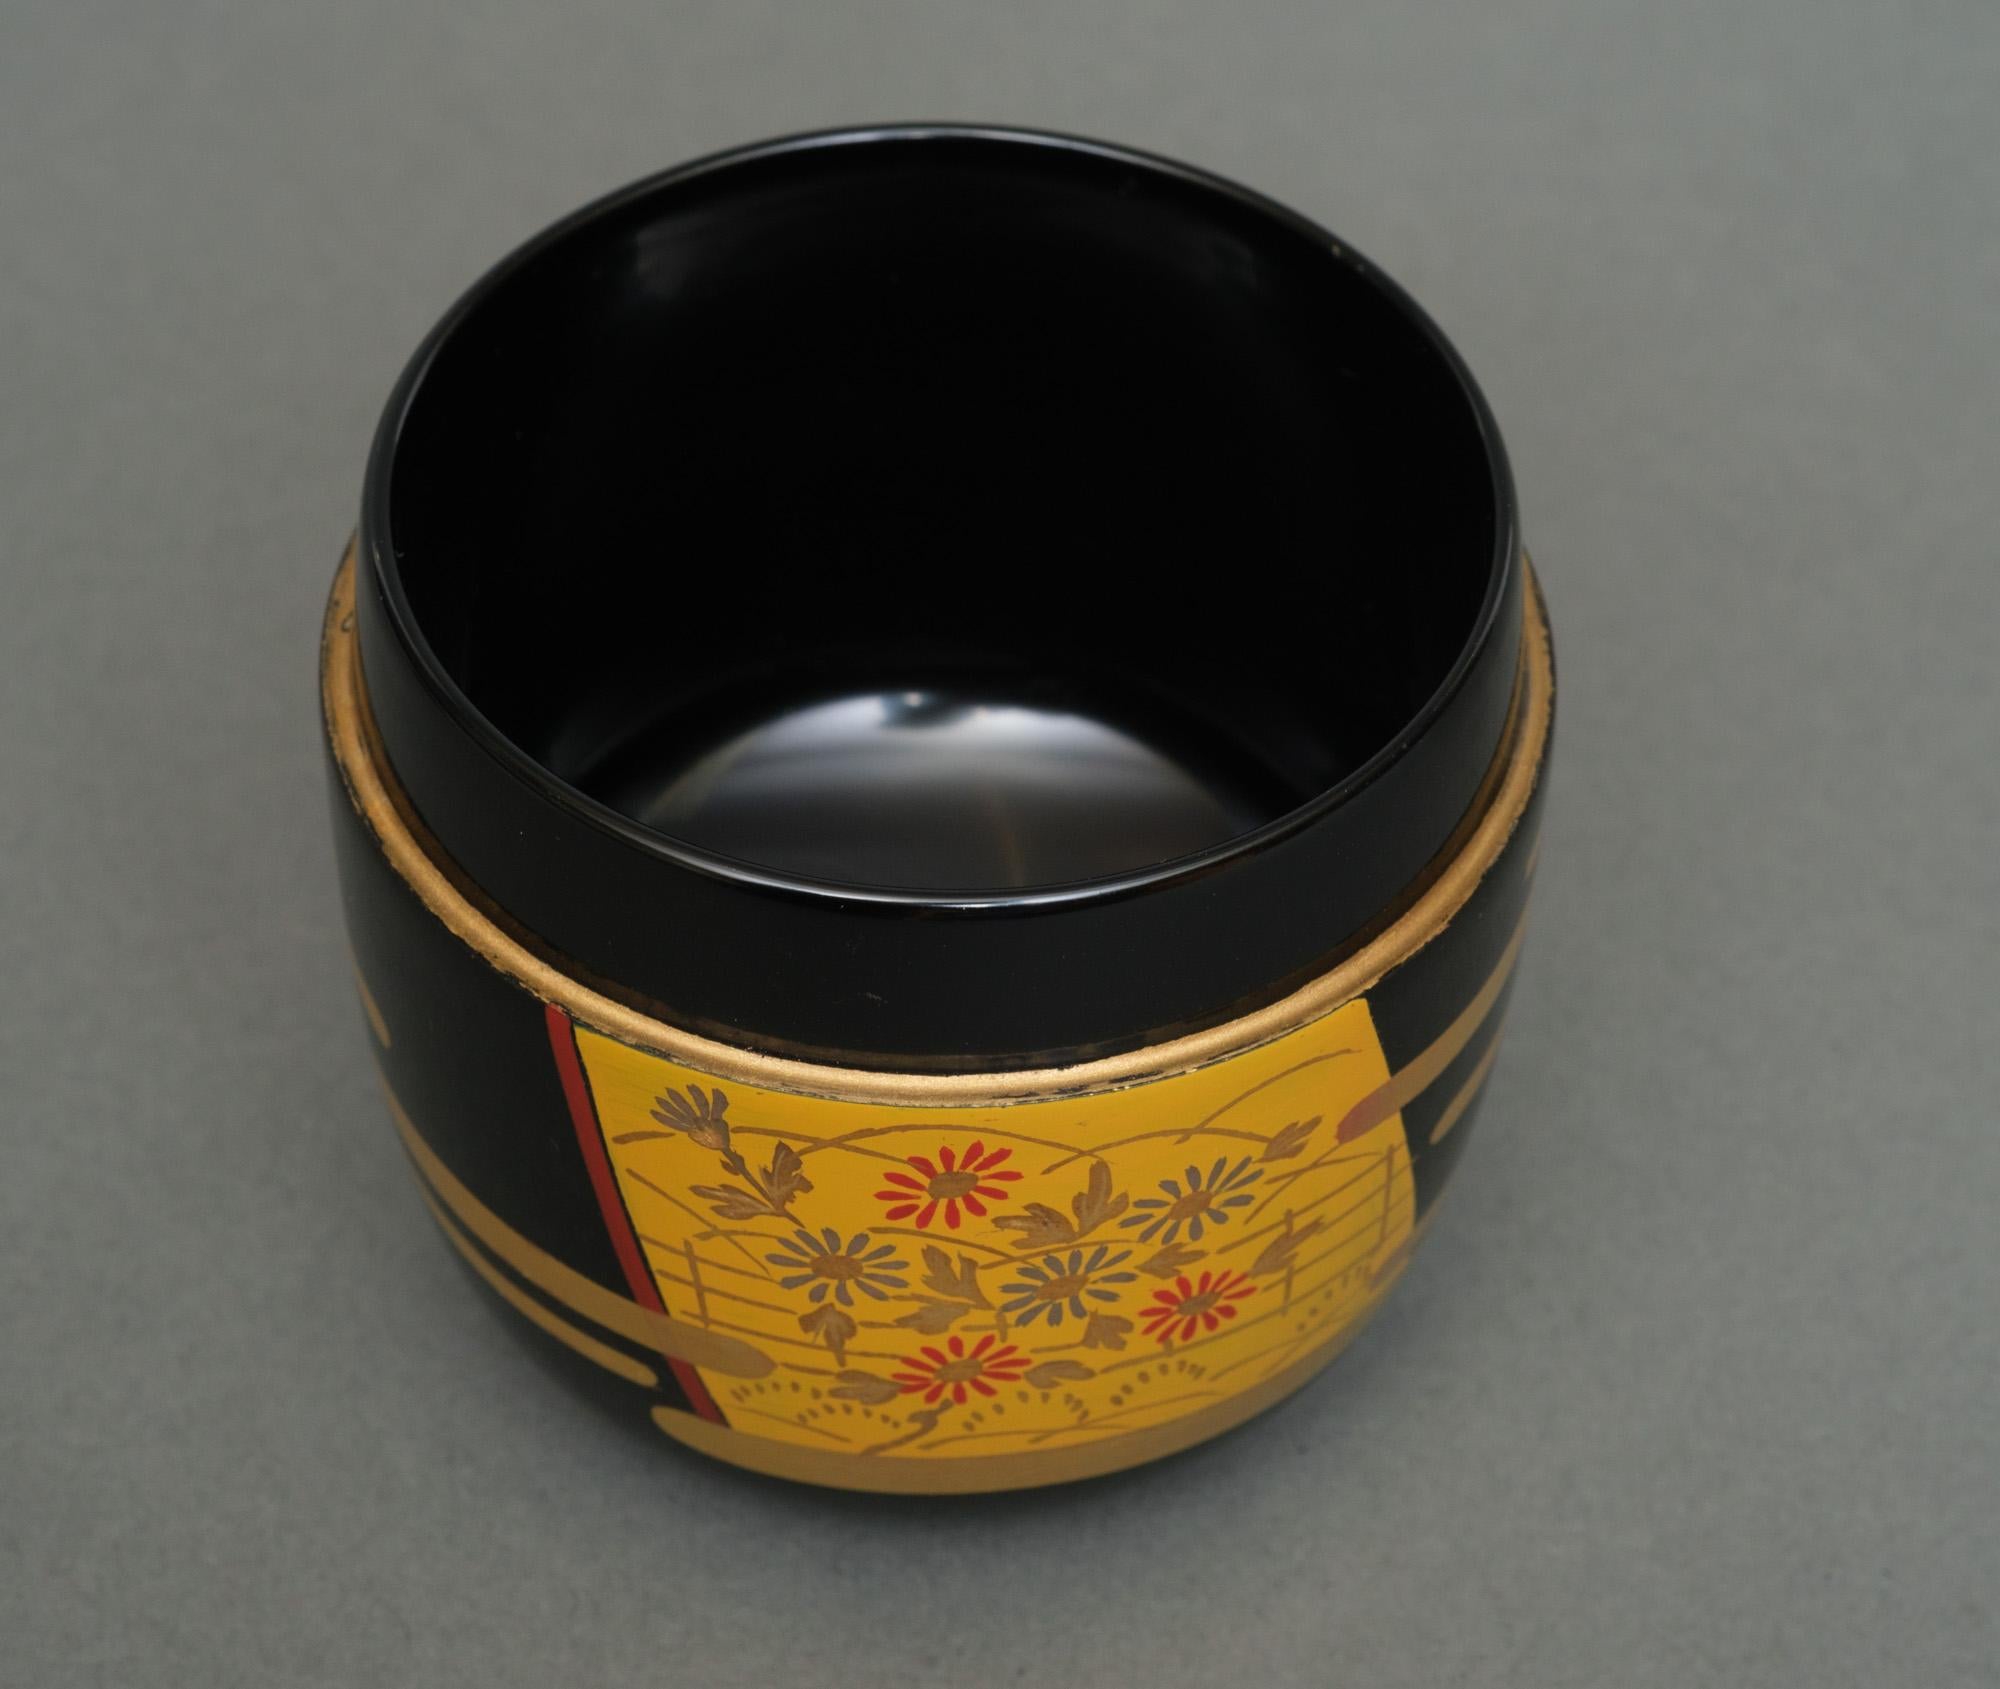 Japanese Lacquer Natsume 棗 with Kimono Design by Takahashi Masayoshi 高橋正良 For Sale 6